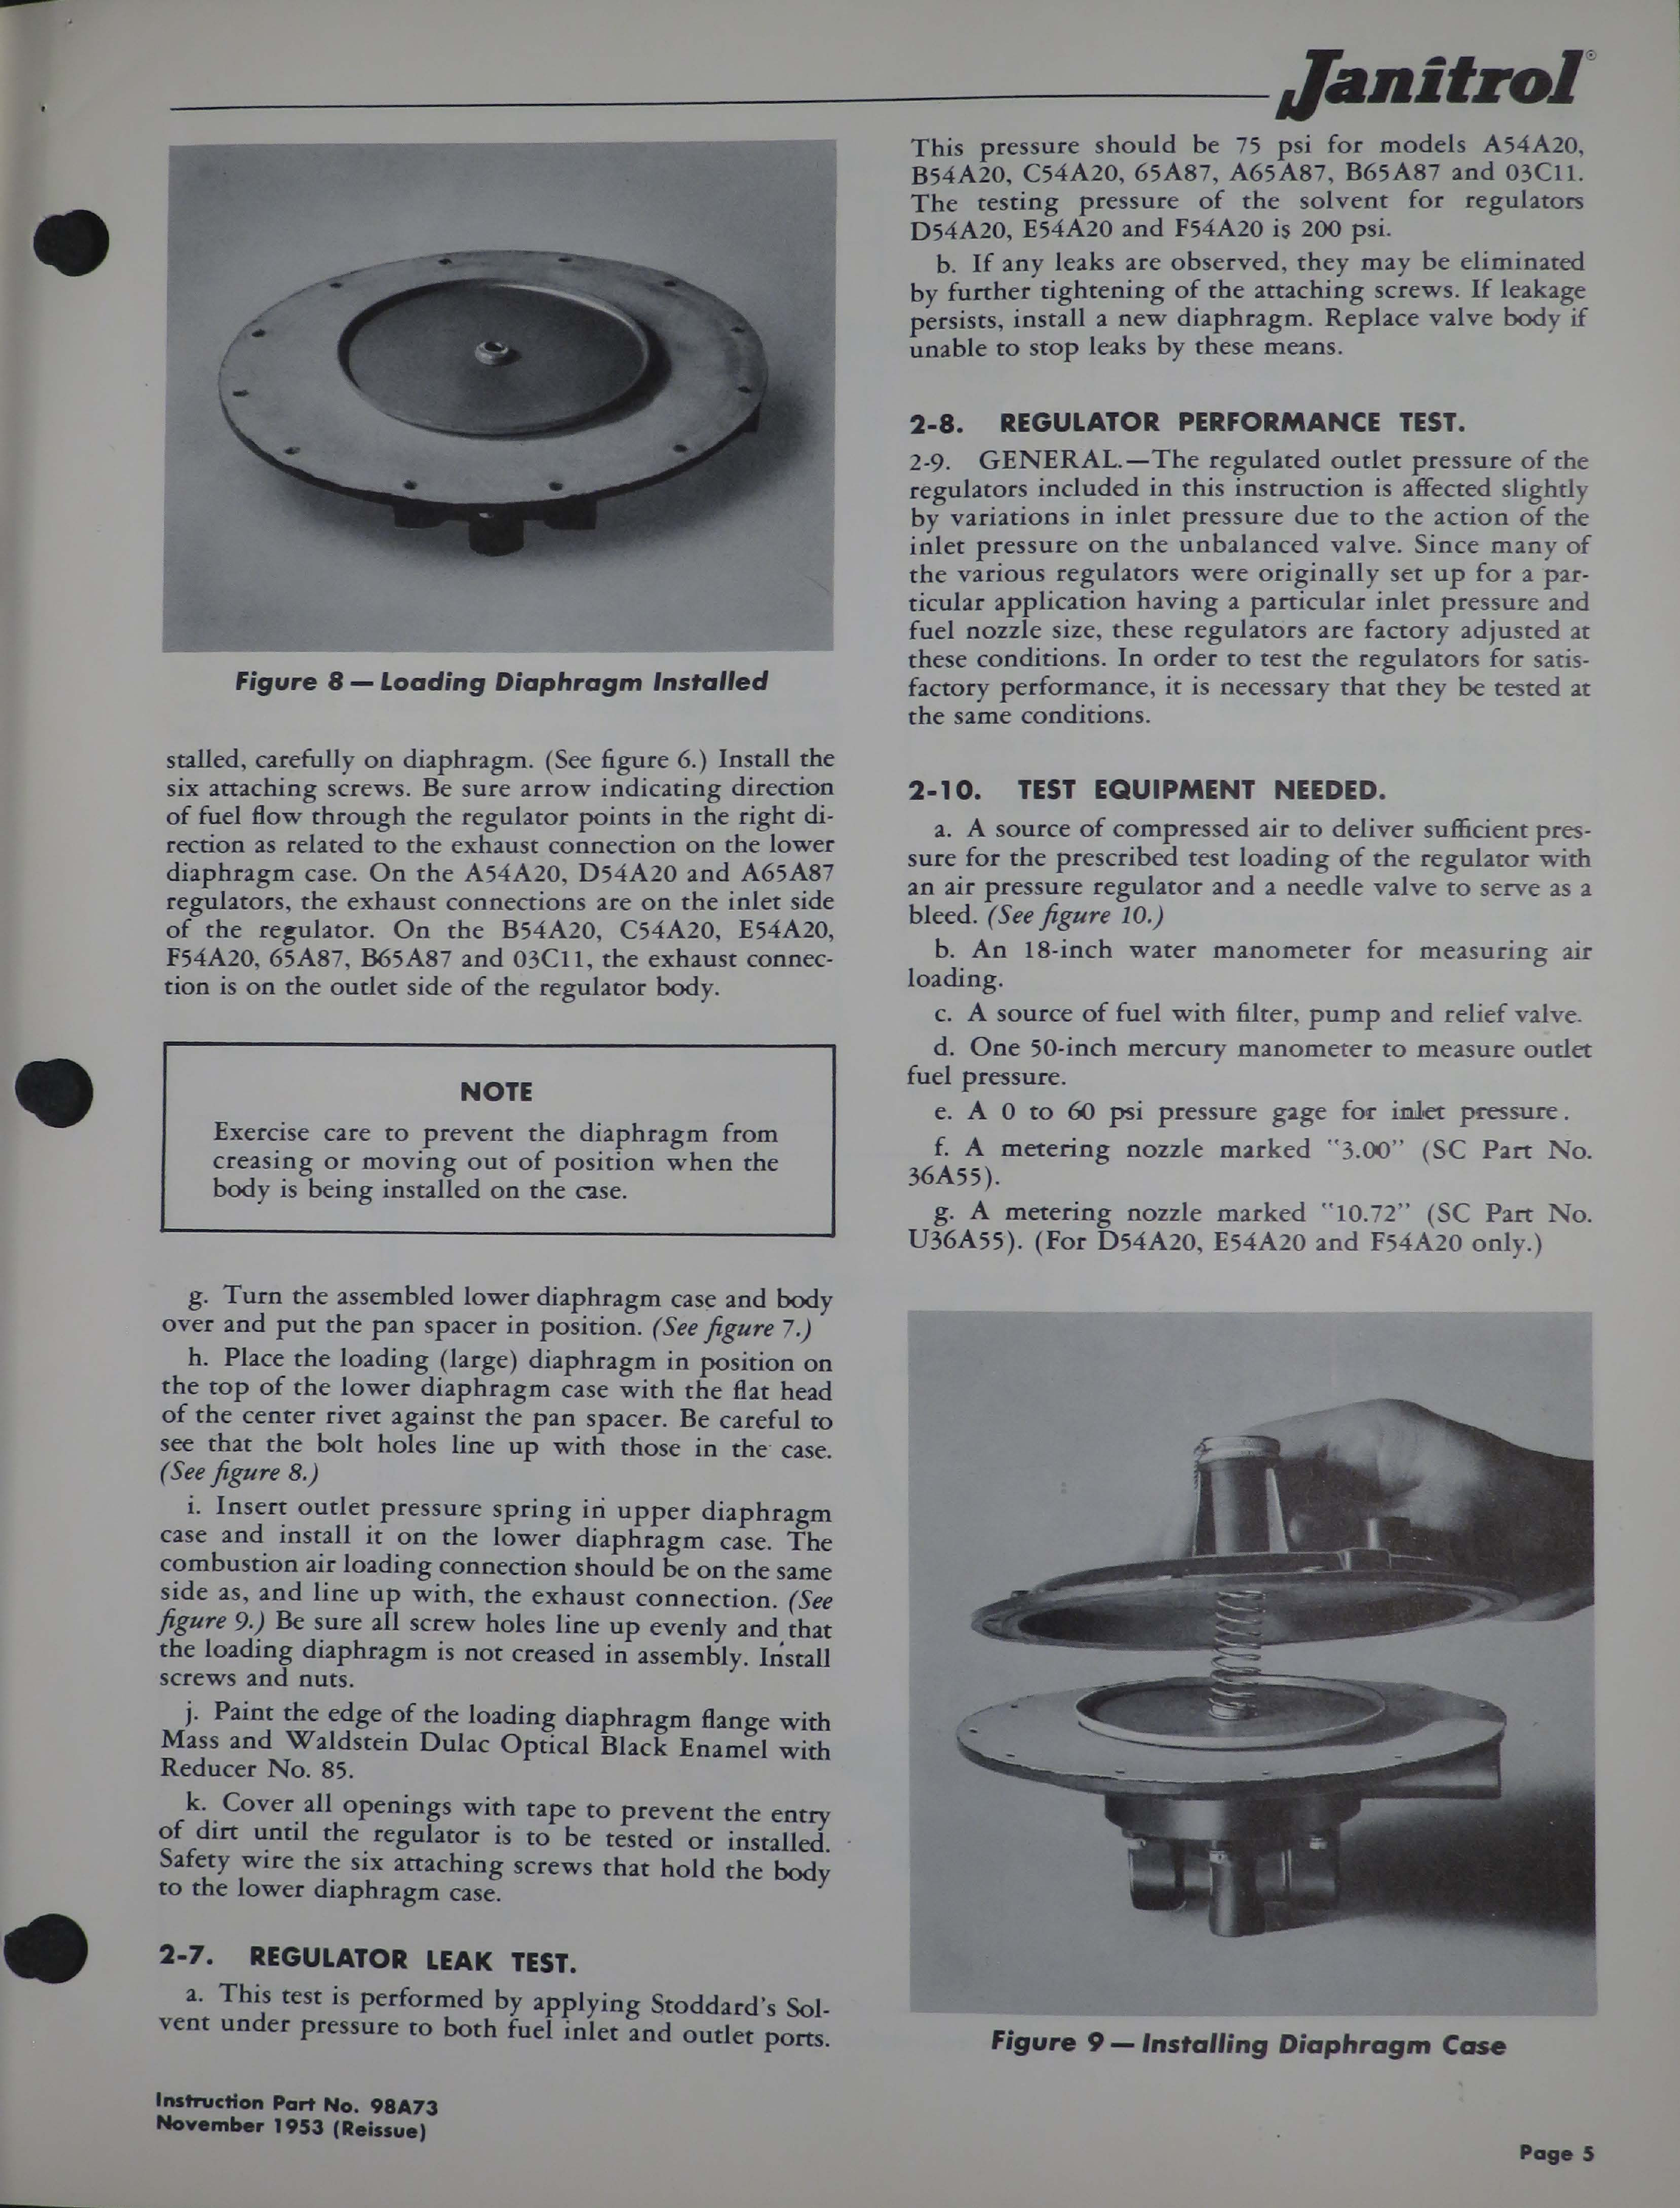 Sample page 5 from AirCorps Library document: Maintenance Instructions for Air Loaded Fuel Pressure Regulator - Series 54A20, 65A87 and 03C11